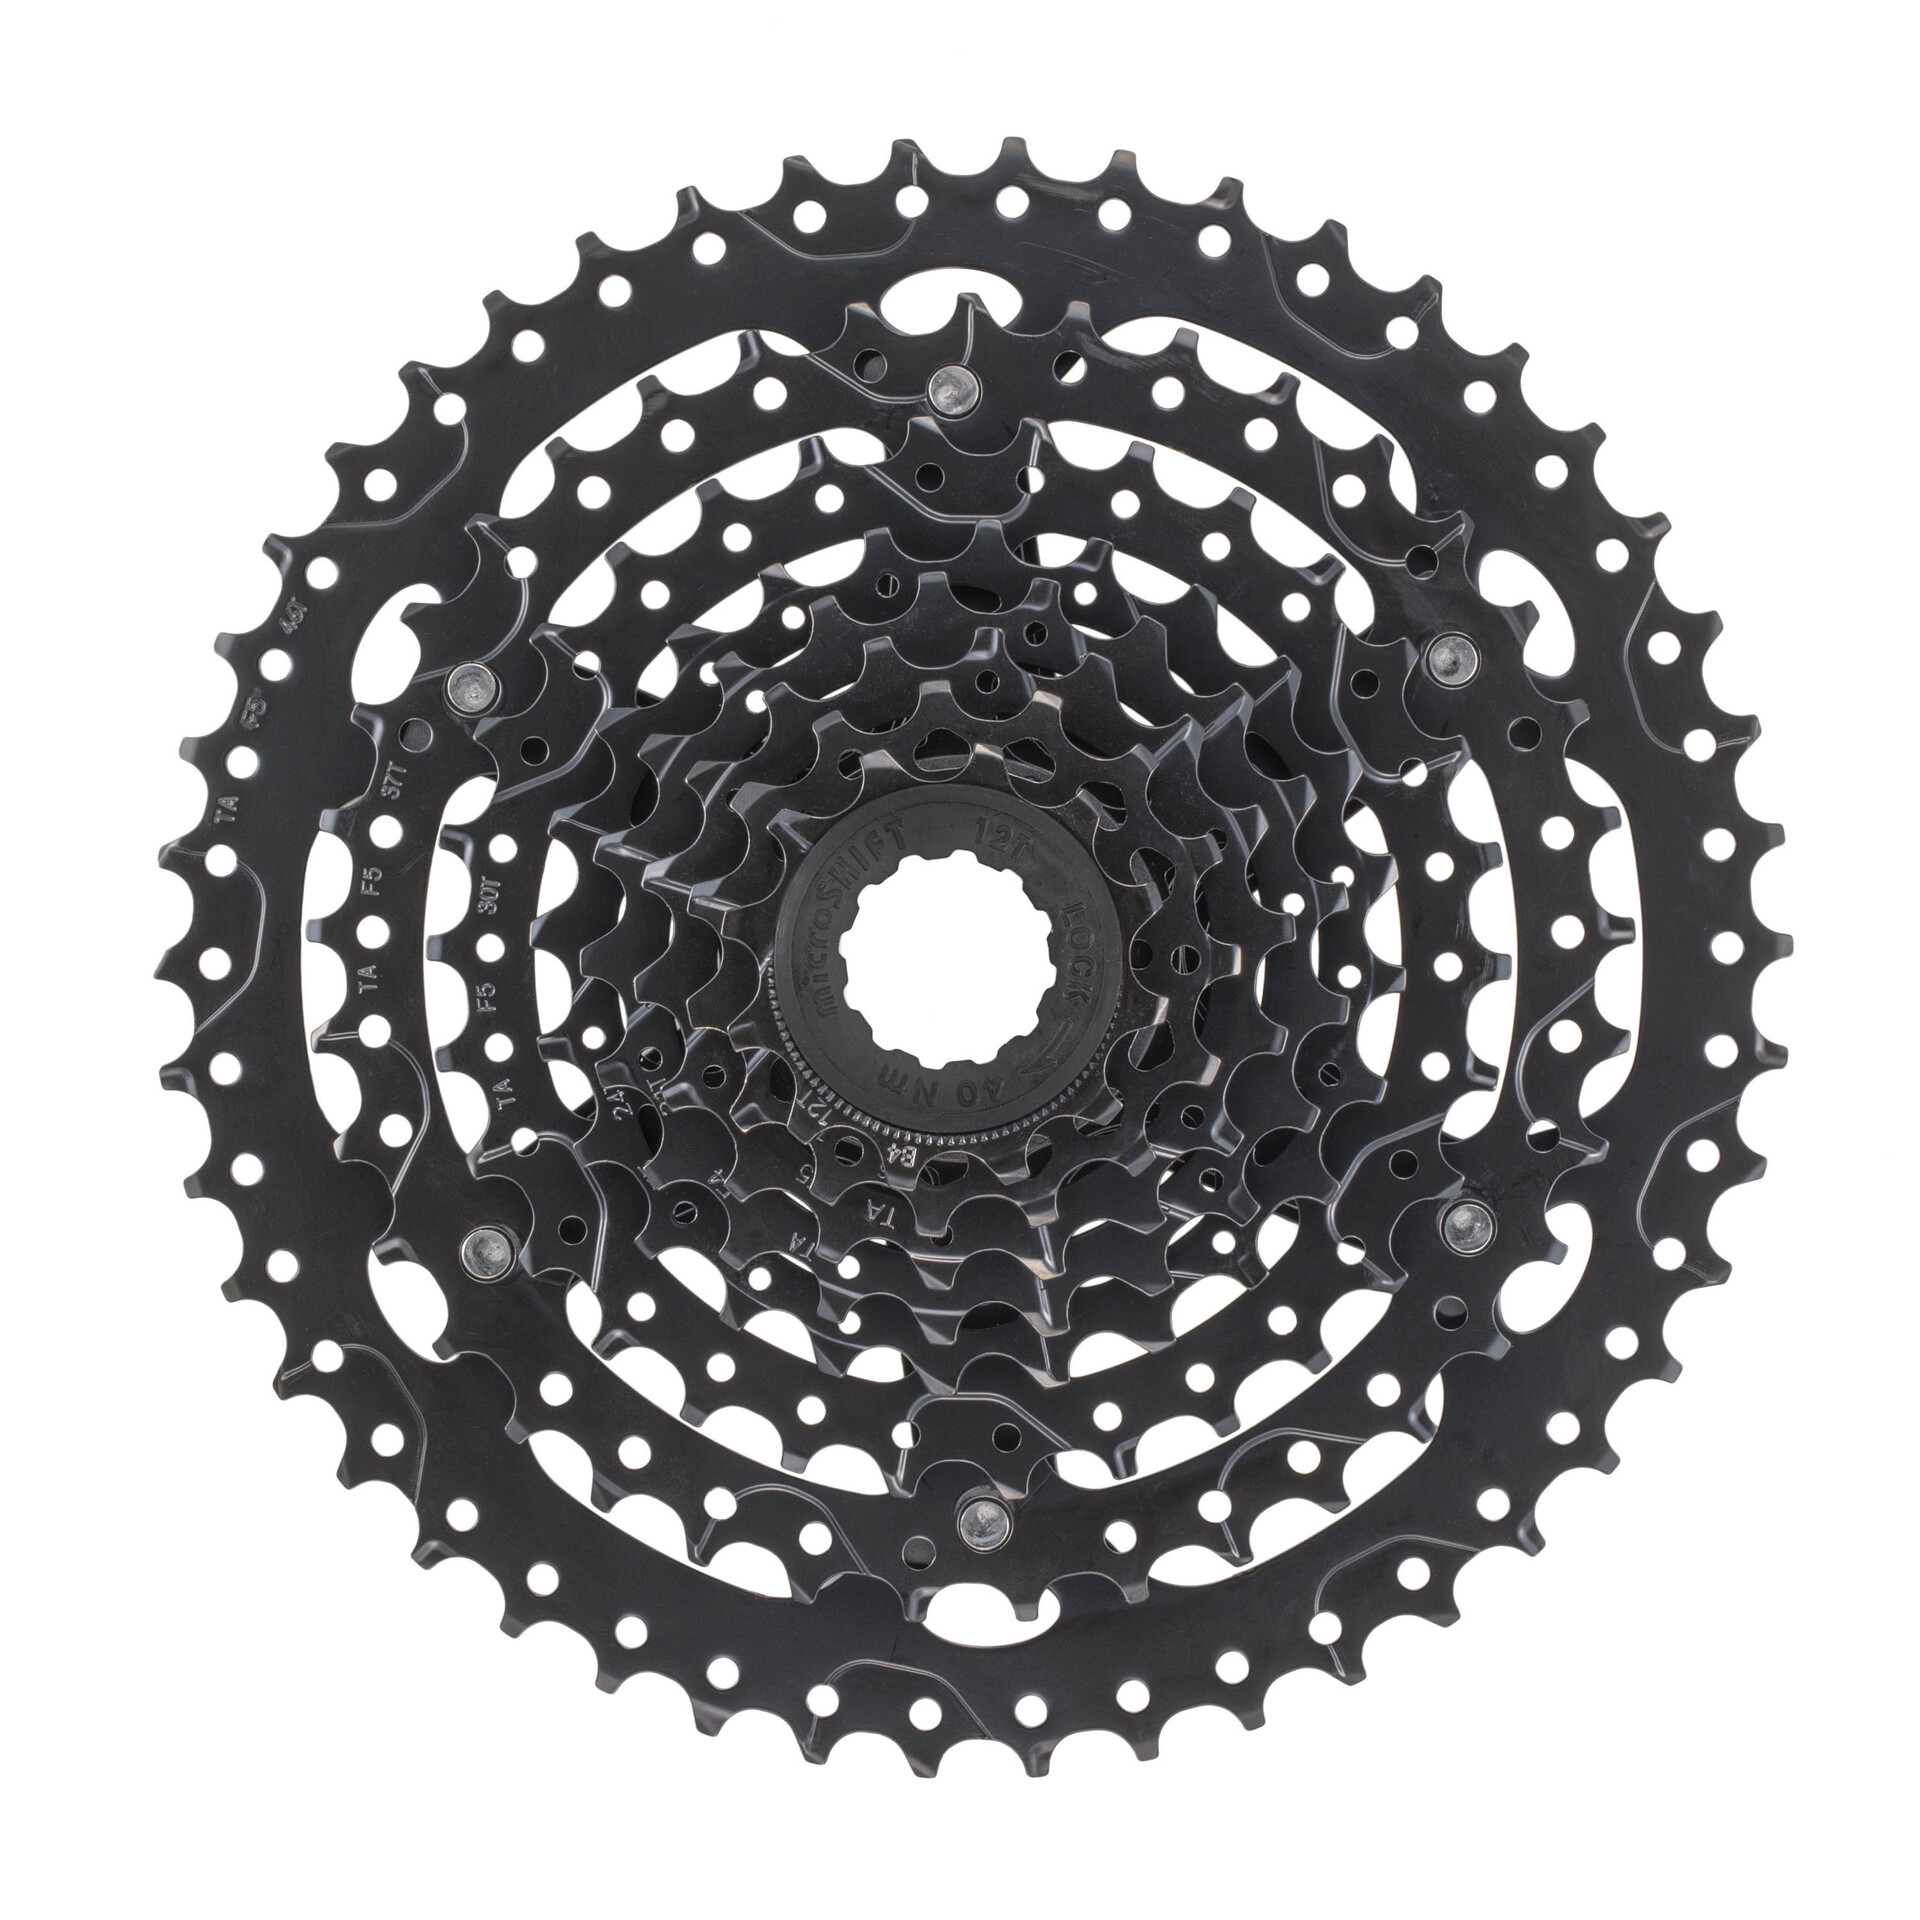 Microshift H-Series Acolyte 8 Speed Cassette 12-46T